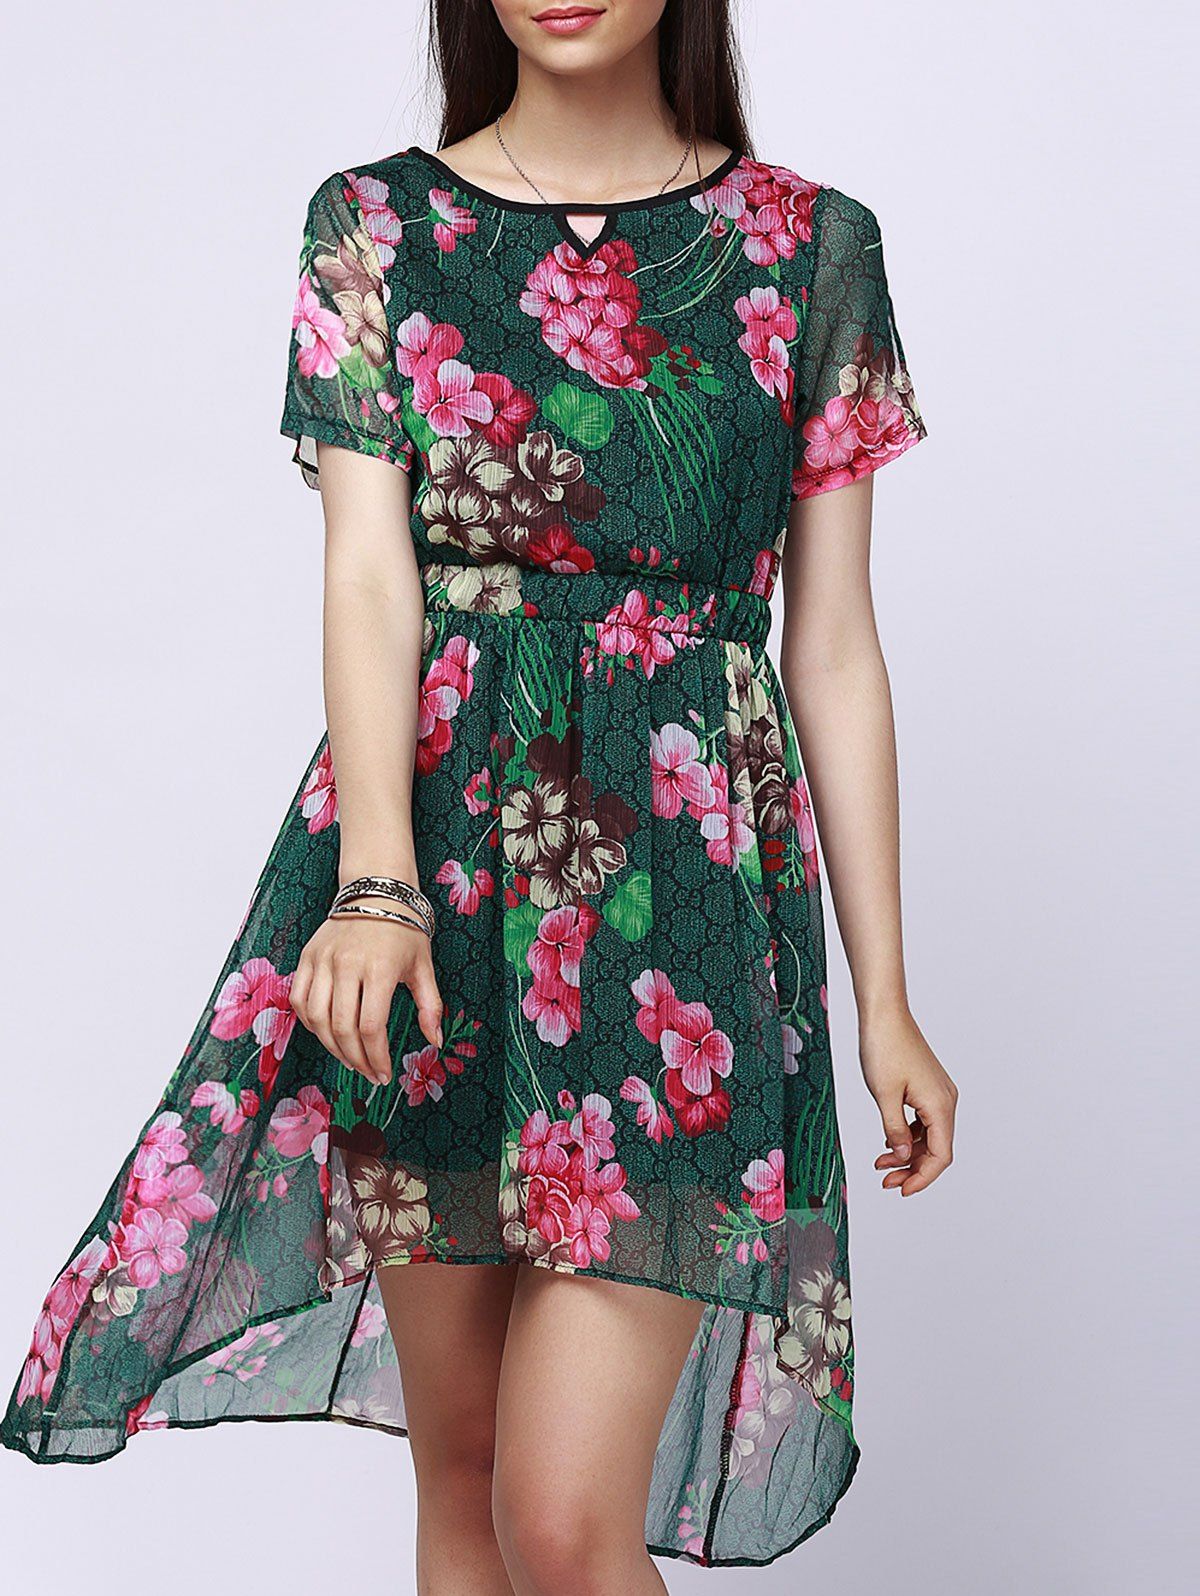 Gorgeous Jewel Neck Short Sleeve Floral Print High Low Dress For Women - GREEN M